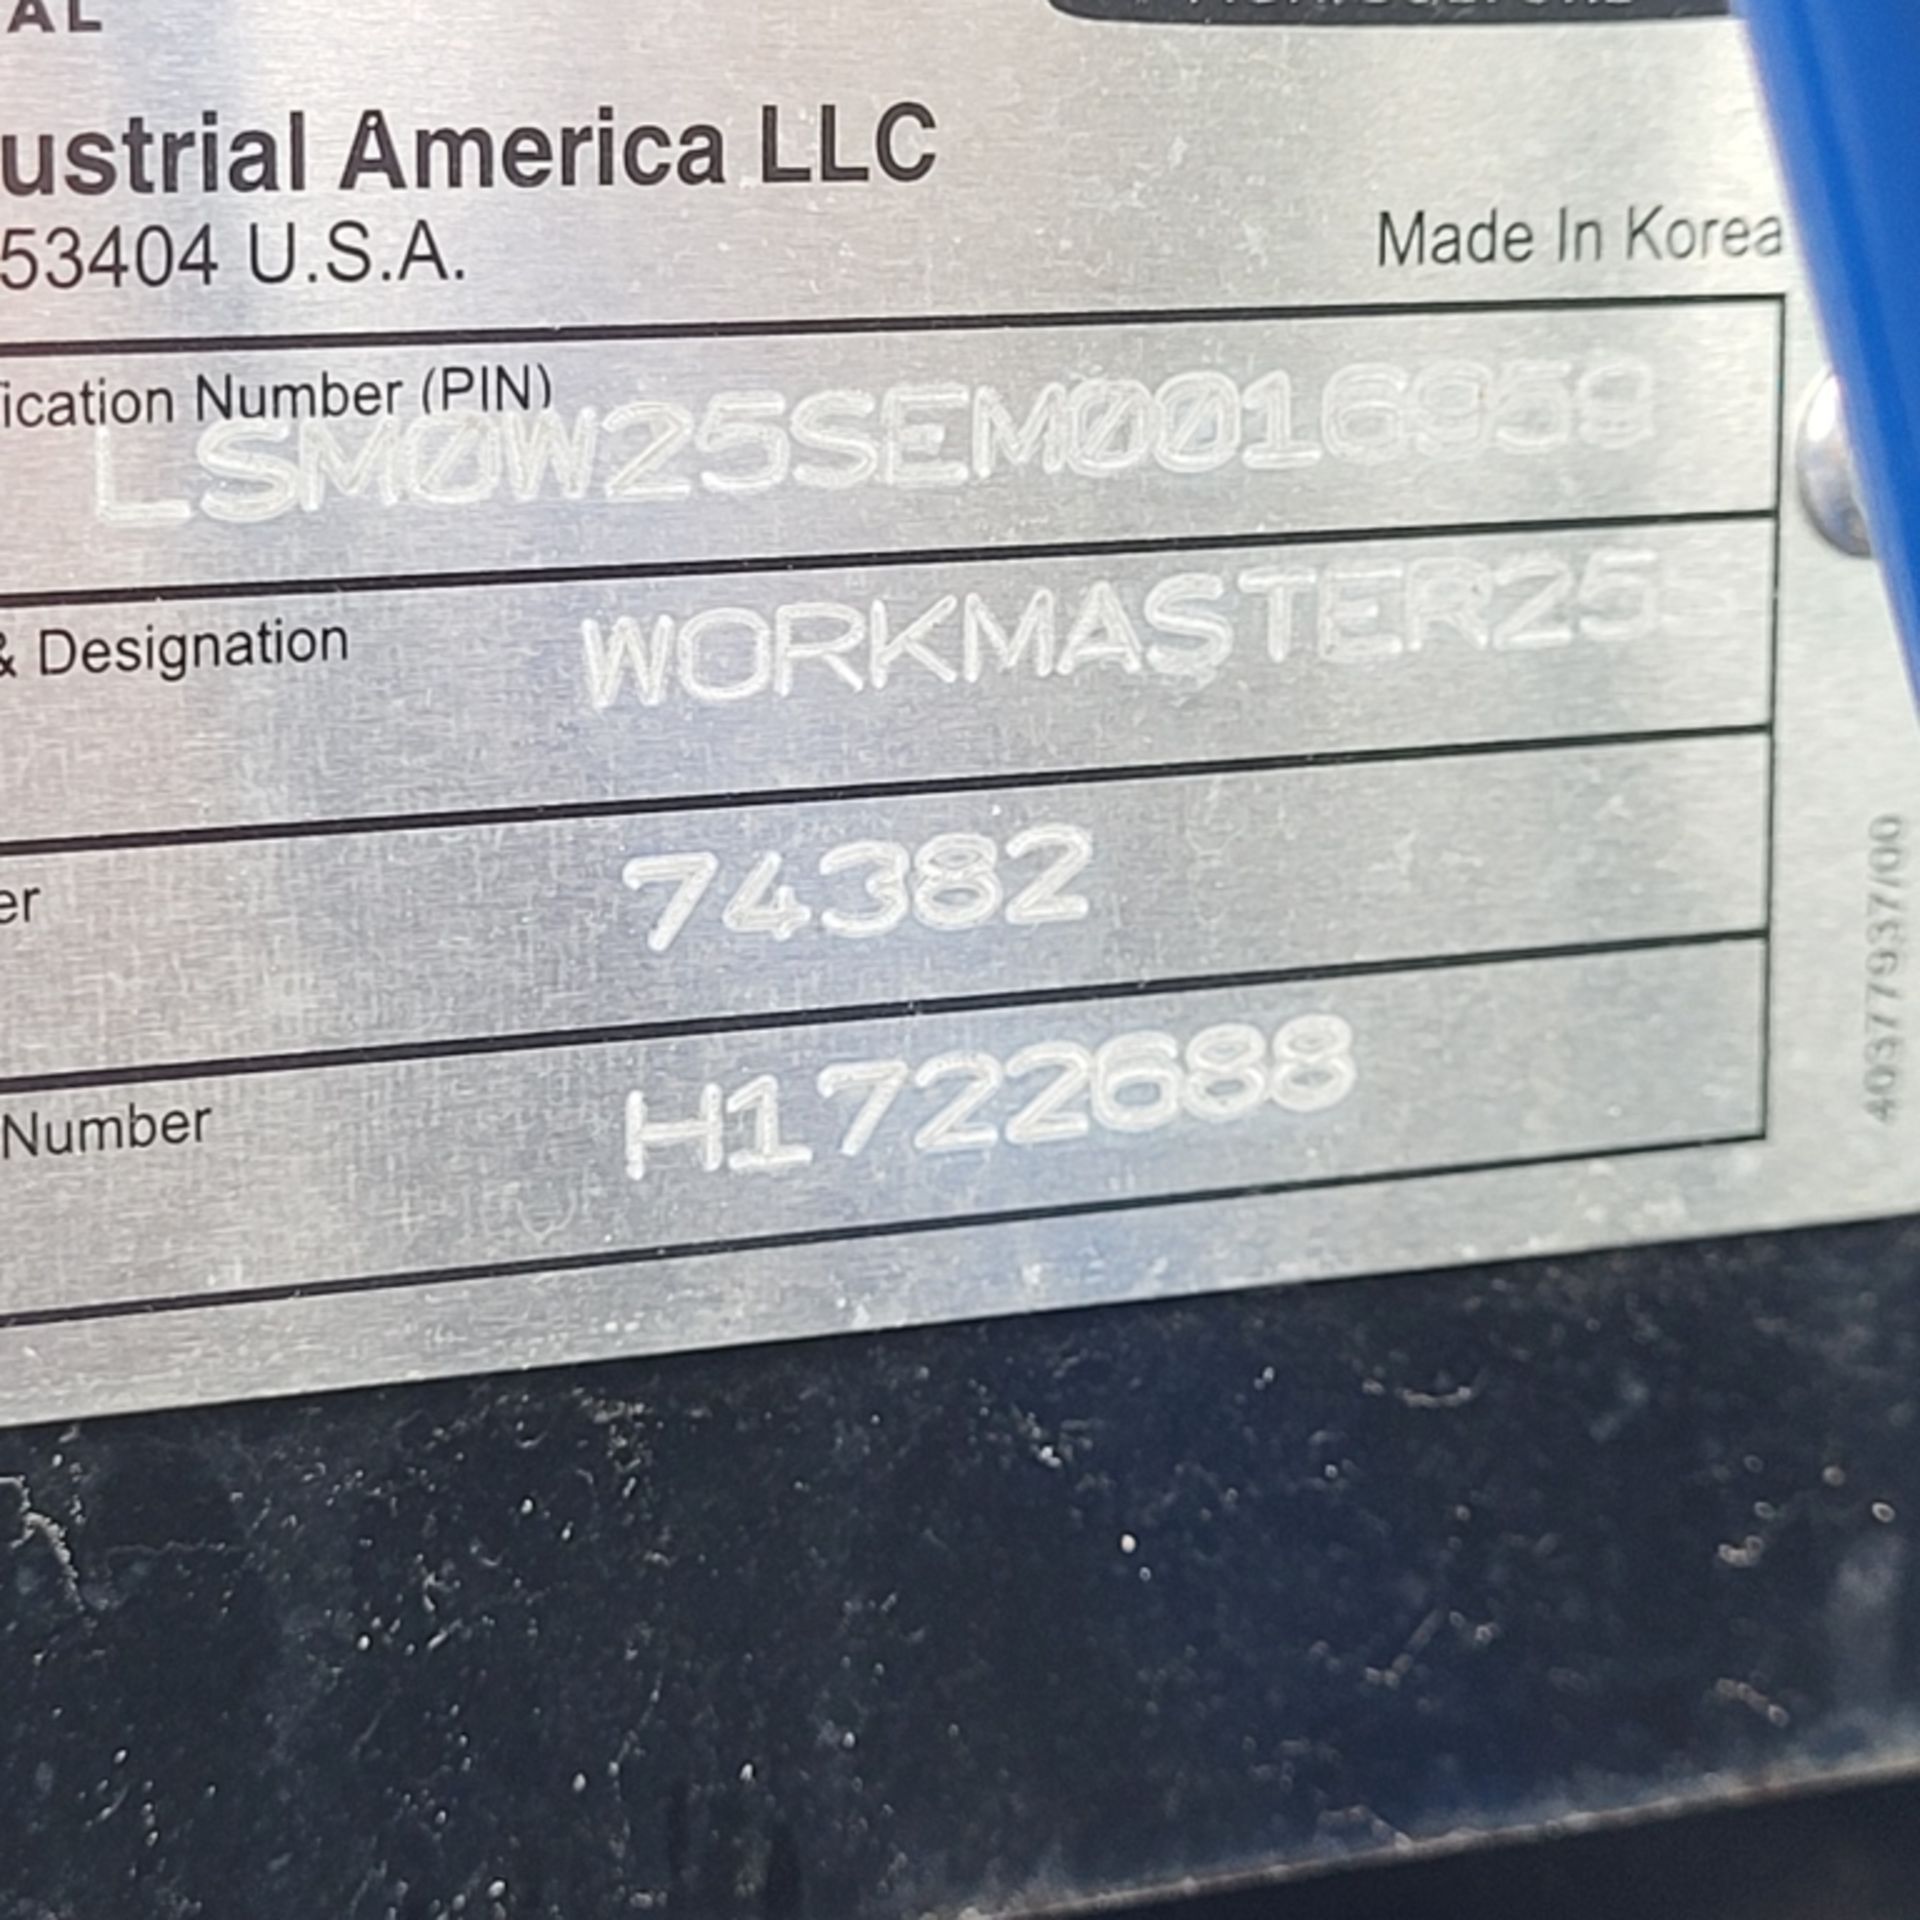 New Holland Workmaster 25s Tractor - Image 7 of 8